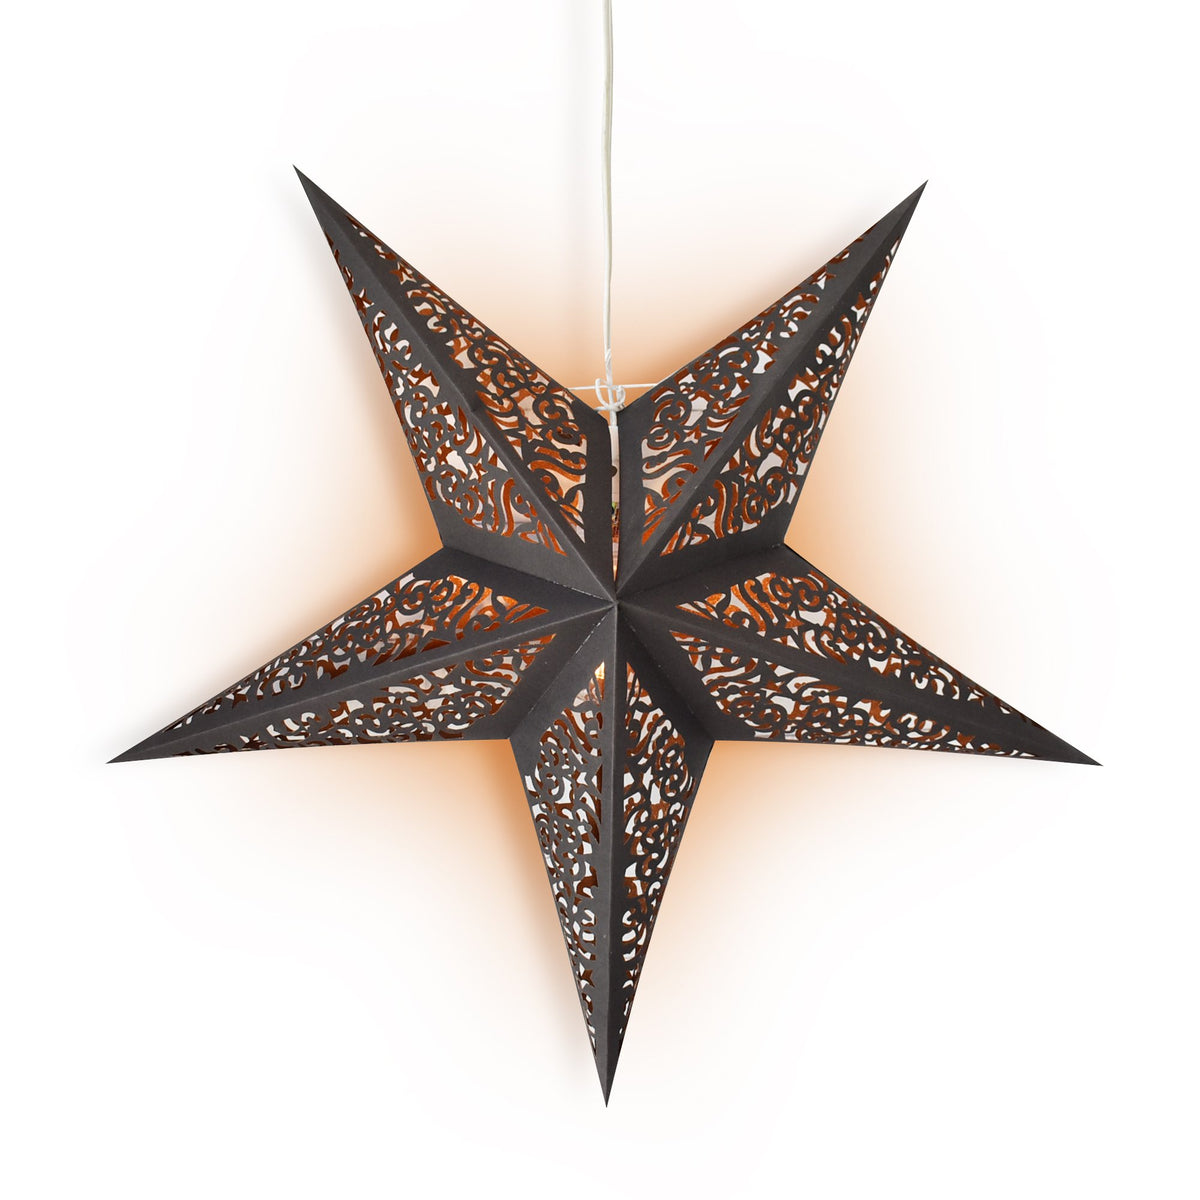 24&quot; Black / Gold Moroccan Glitter Paper Star Lantern, Hanging Wedding &amp; Party Decoration - PaperLanternStore.com - Paper Lanterns, Decor, Party Lights &amp; More